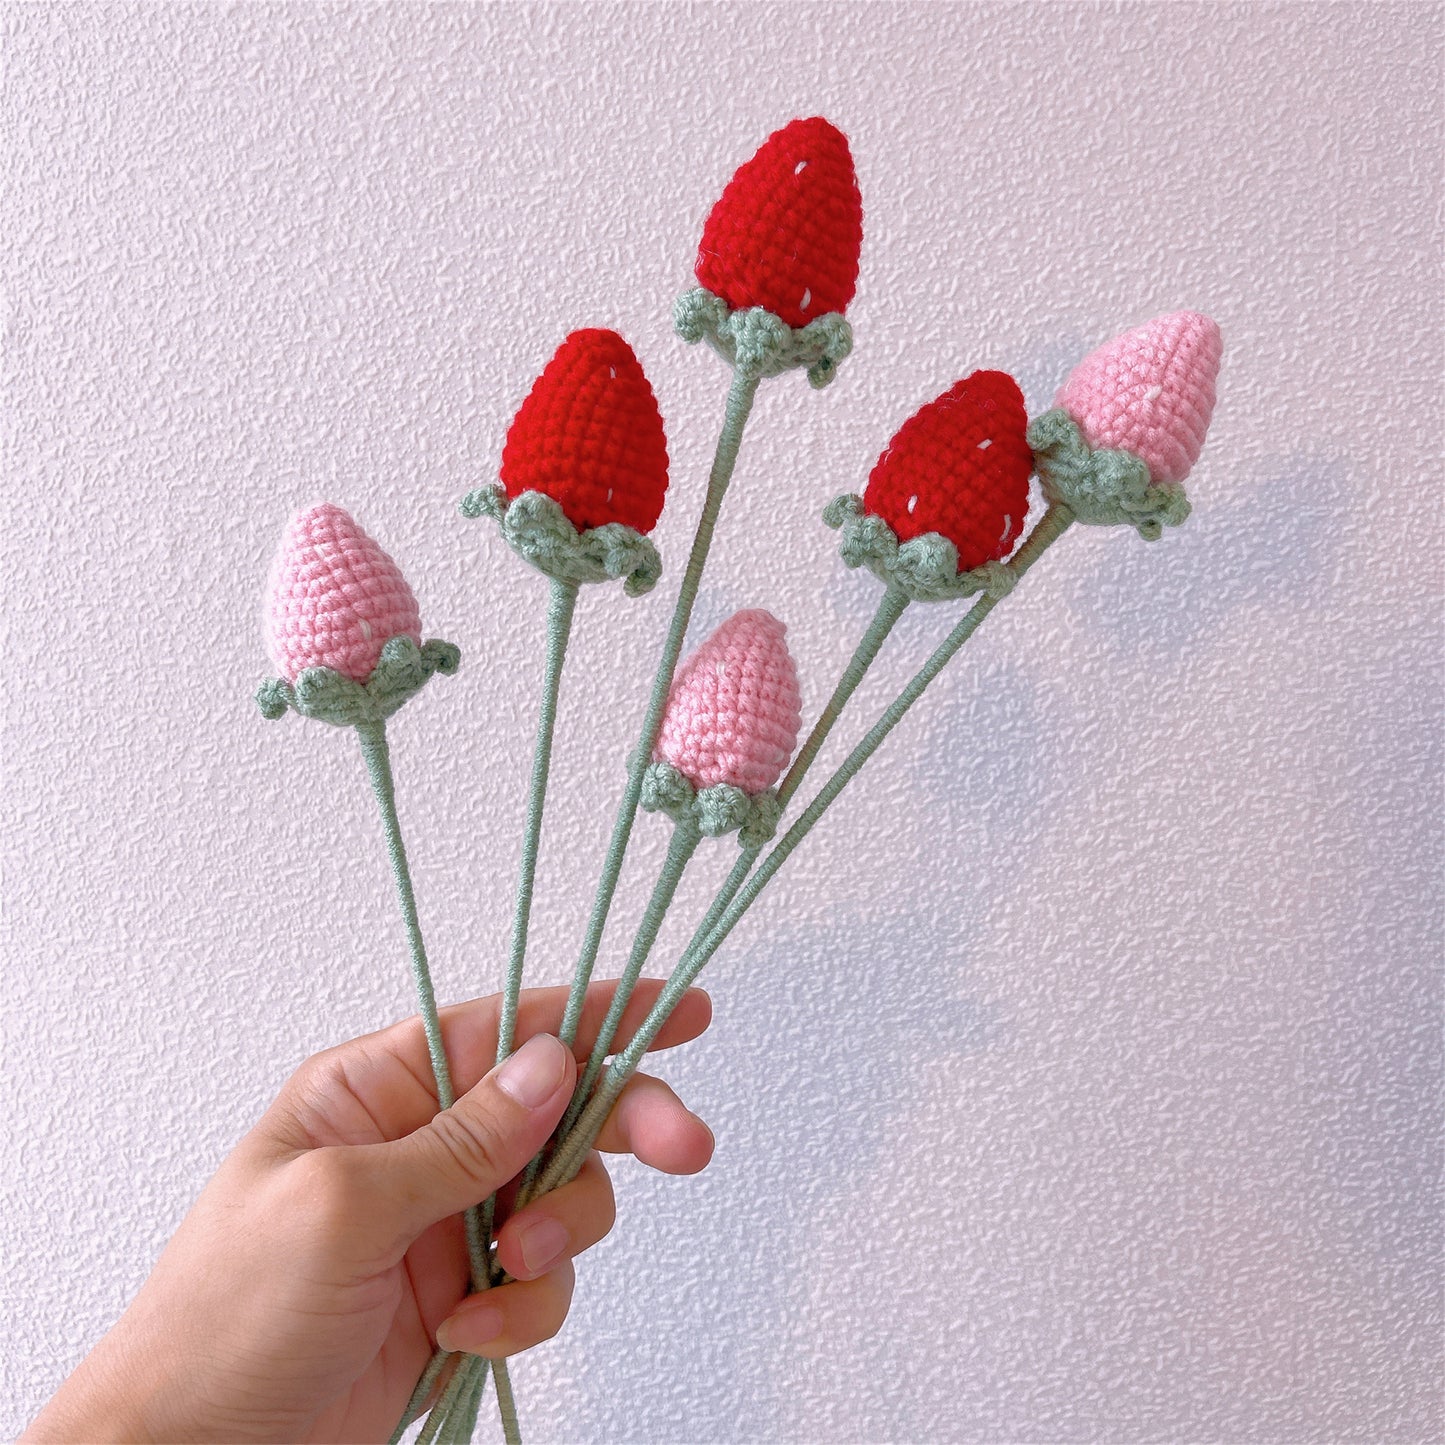 Sweet Strawberry Fields: Handcrafted Crochet Strawberry Stake for a Charming Garden Decor"